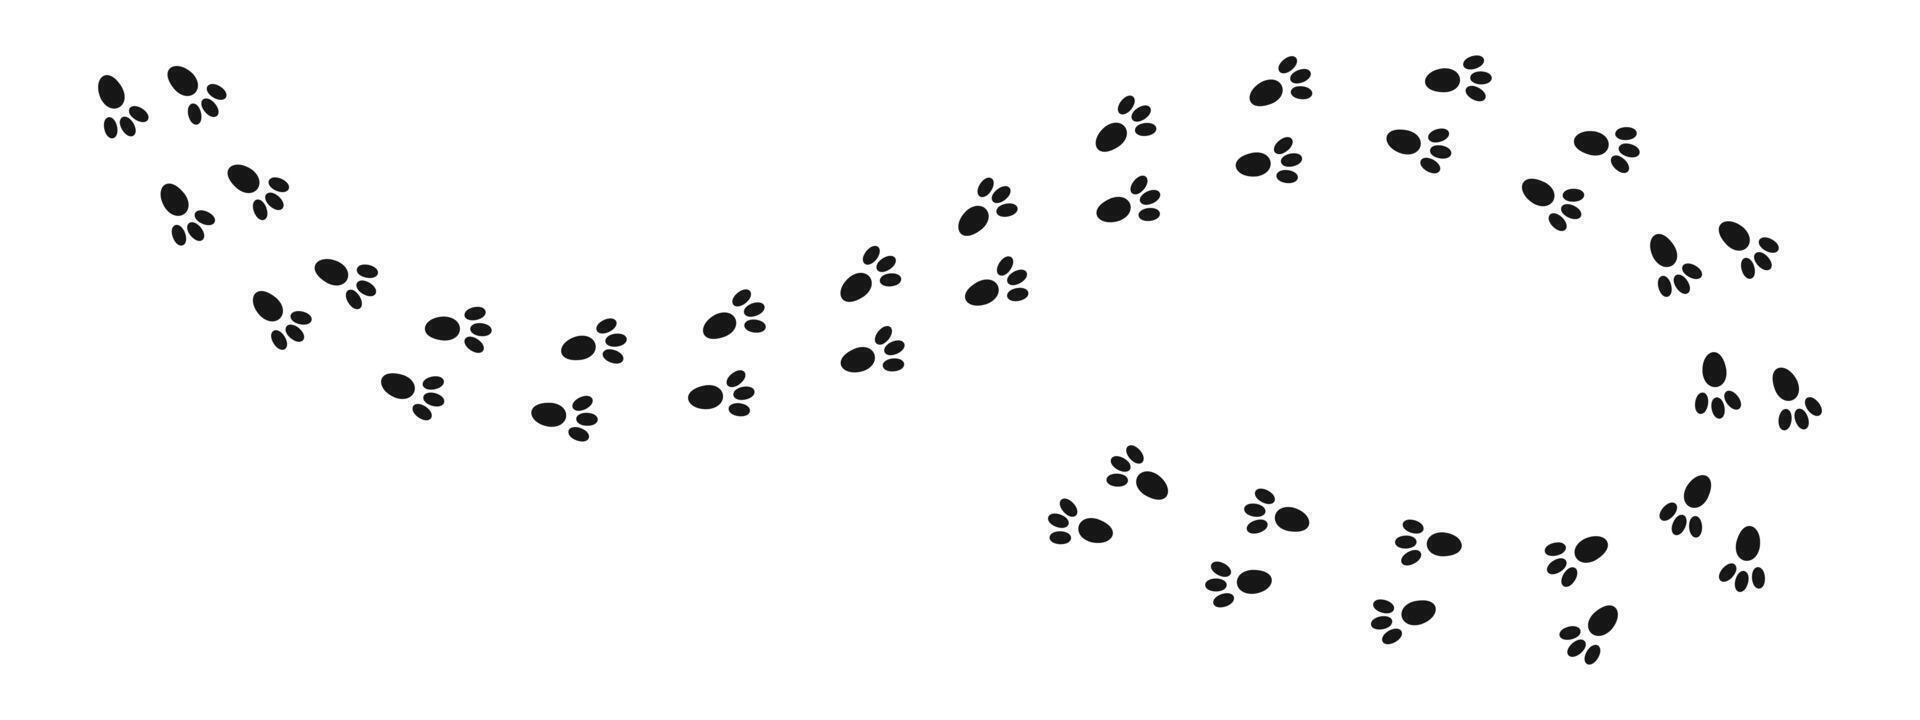 Bunny pawprints. Rabbit paw silhouettes stamps. Trace of wet or mud steps of running or walking hare vector